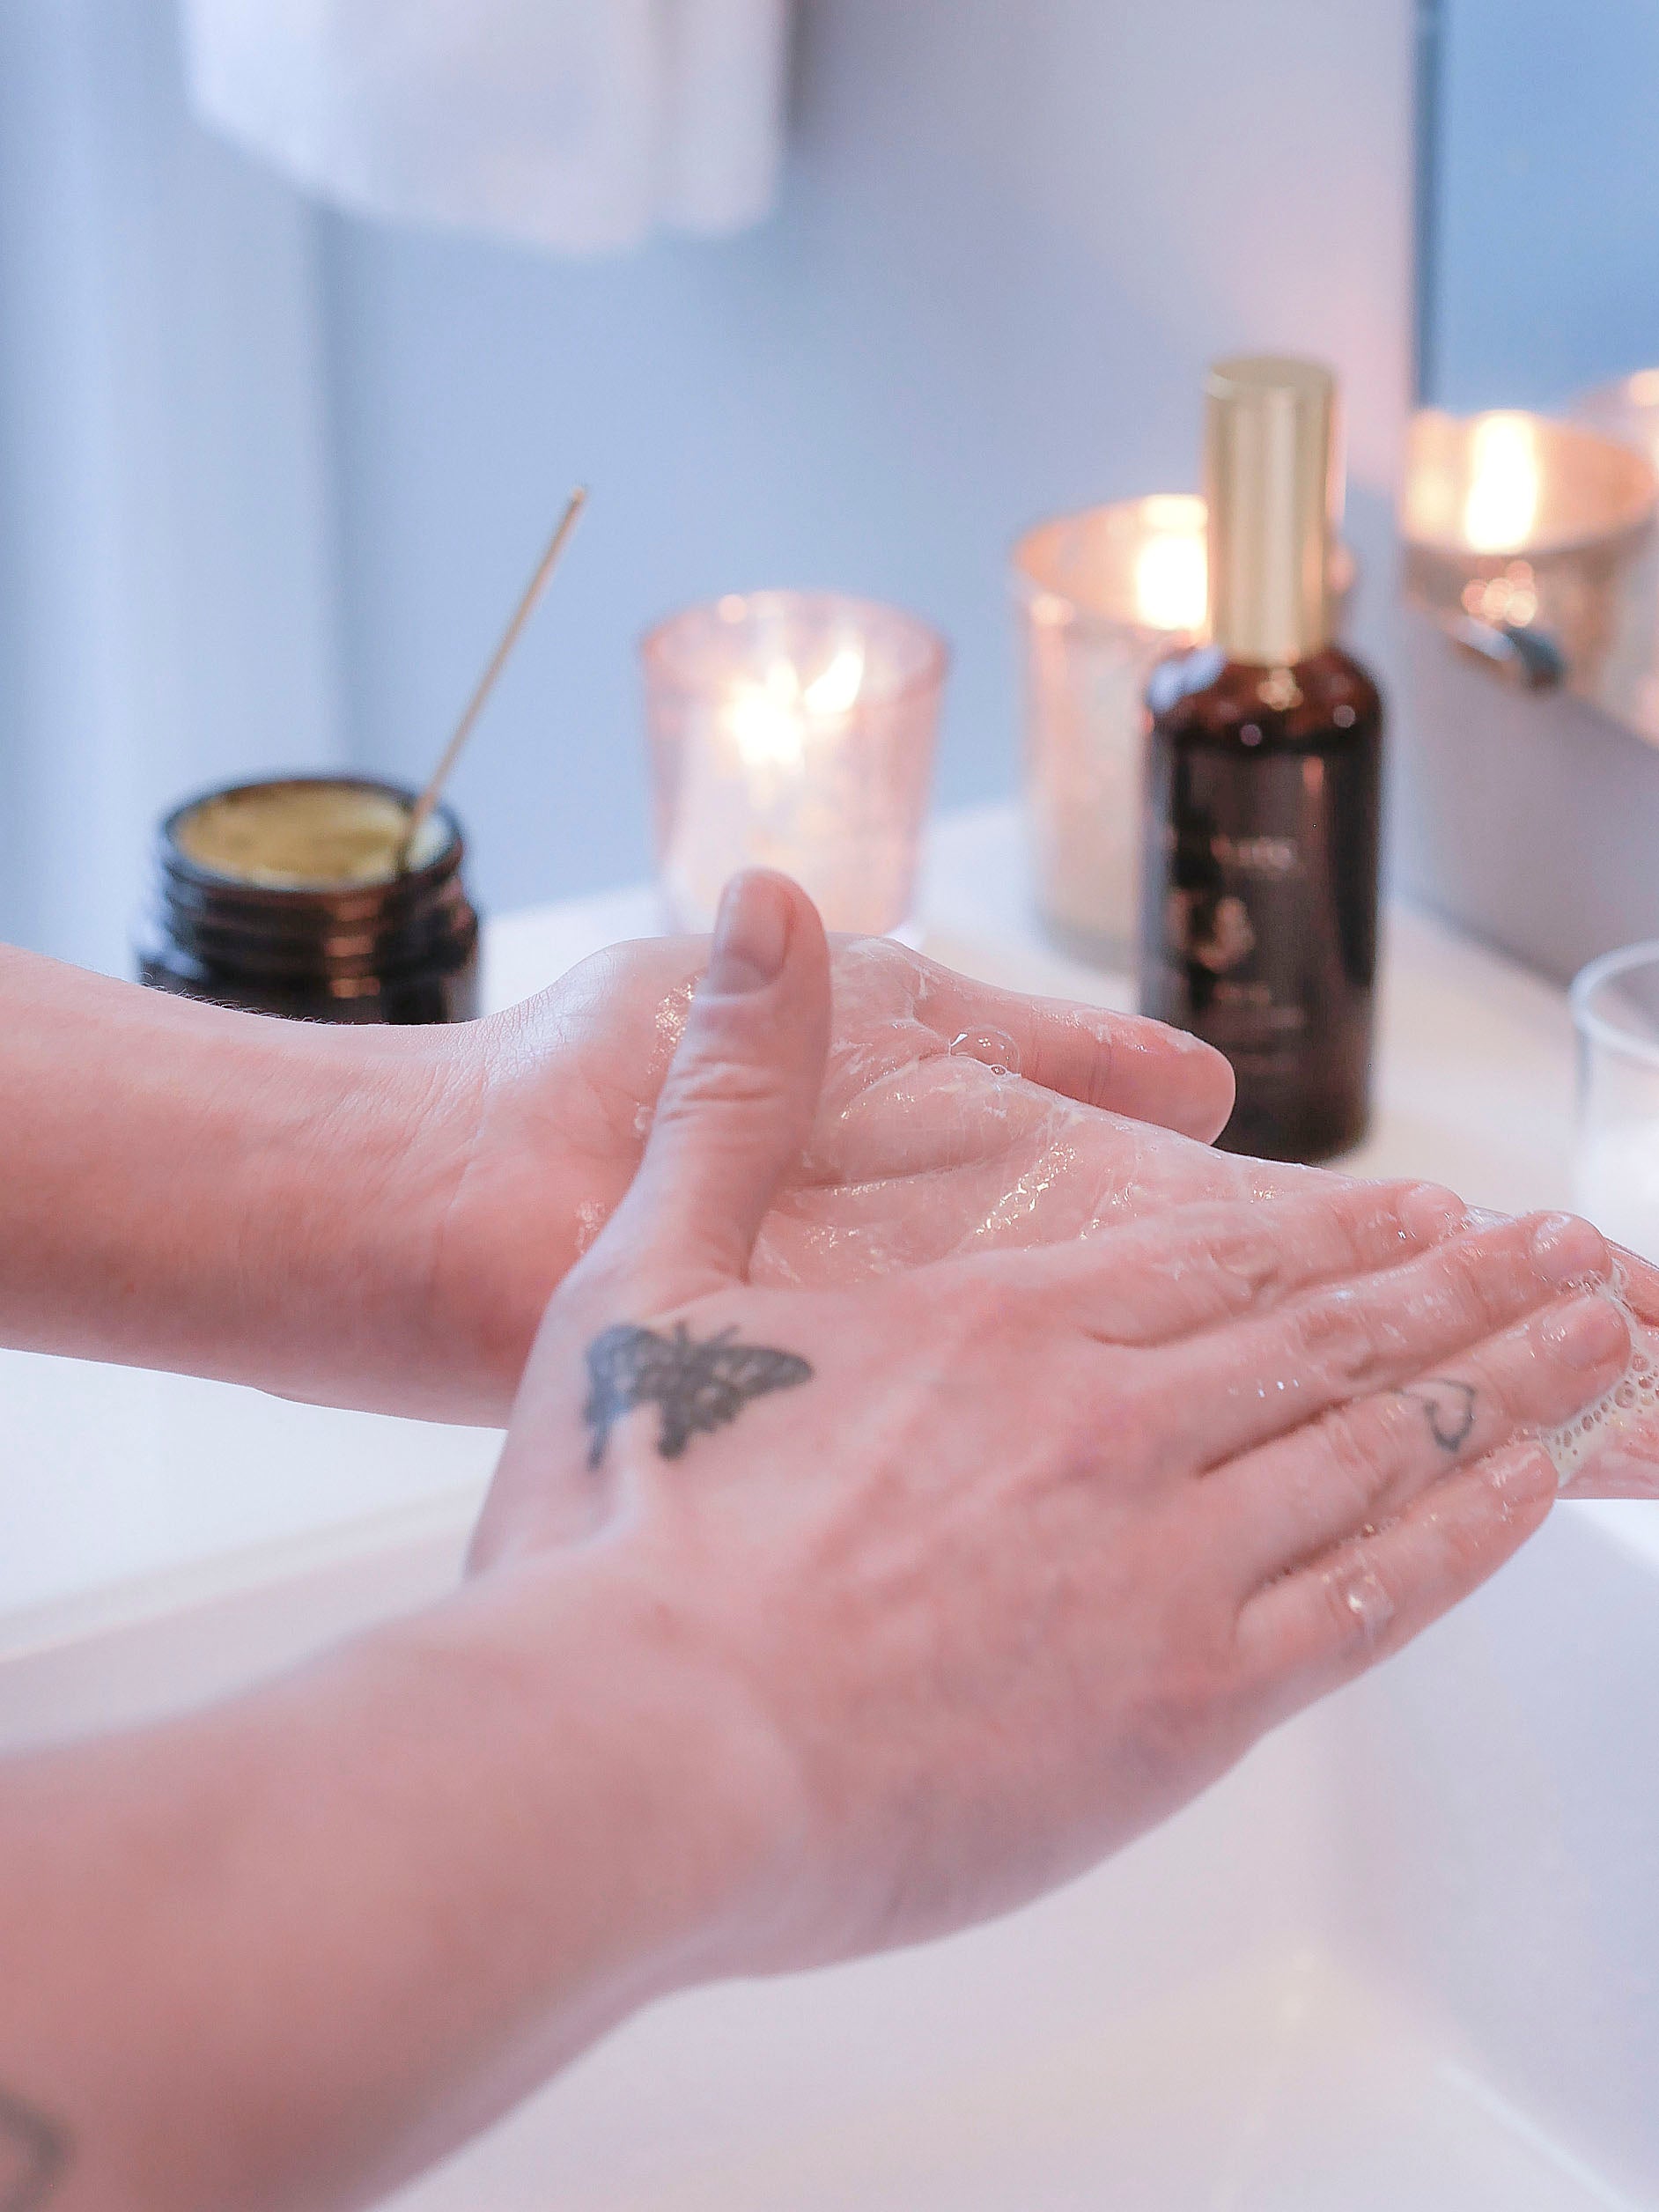 A woman with a butterfly tattoo and heart tattoo on her hands massaging a non-toxic cleansing balm between her hands.